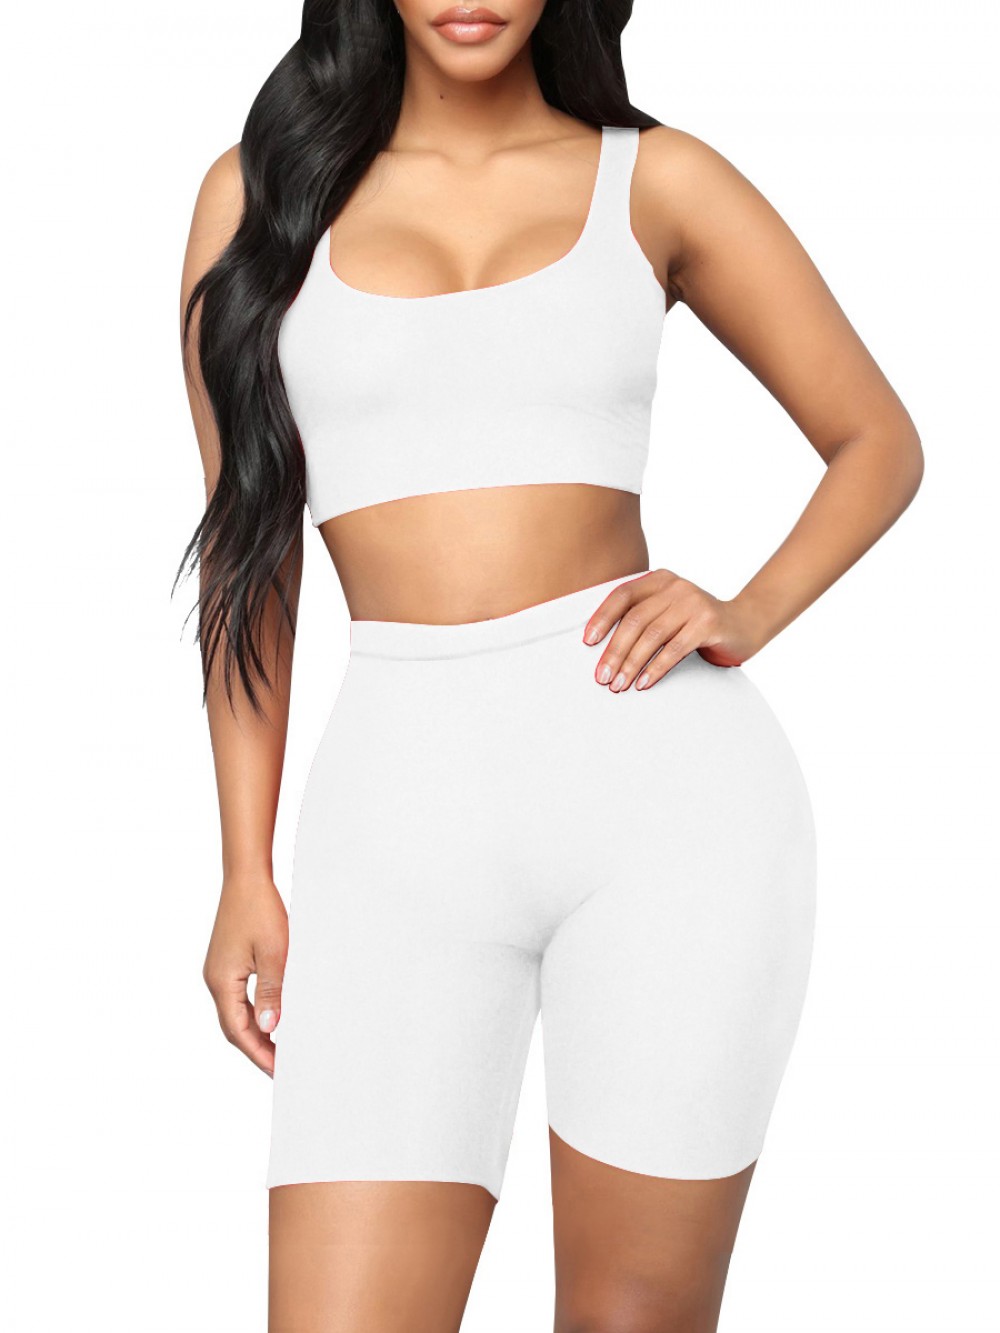 Classic White Cropped Sports Shorts Suit High Waist Forward Women